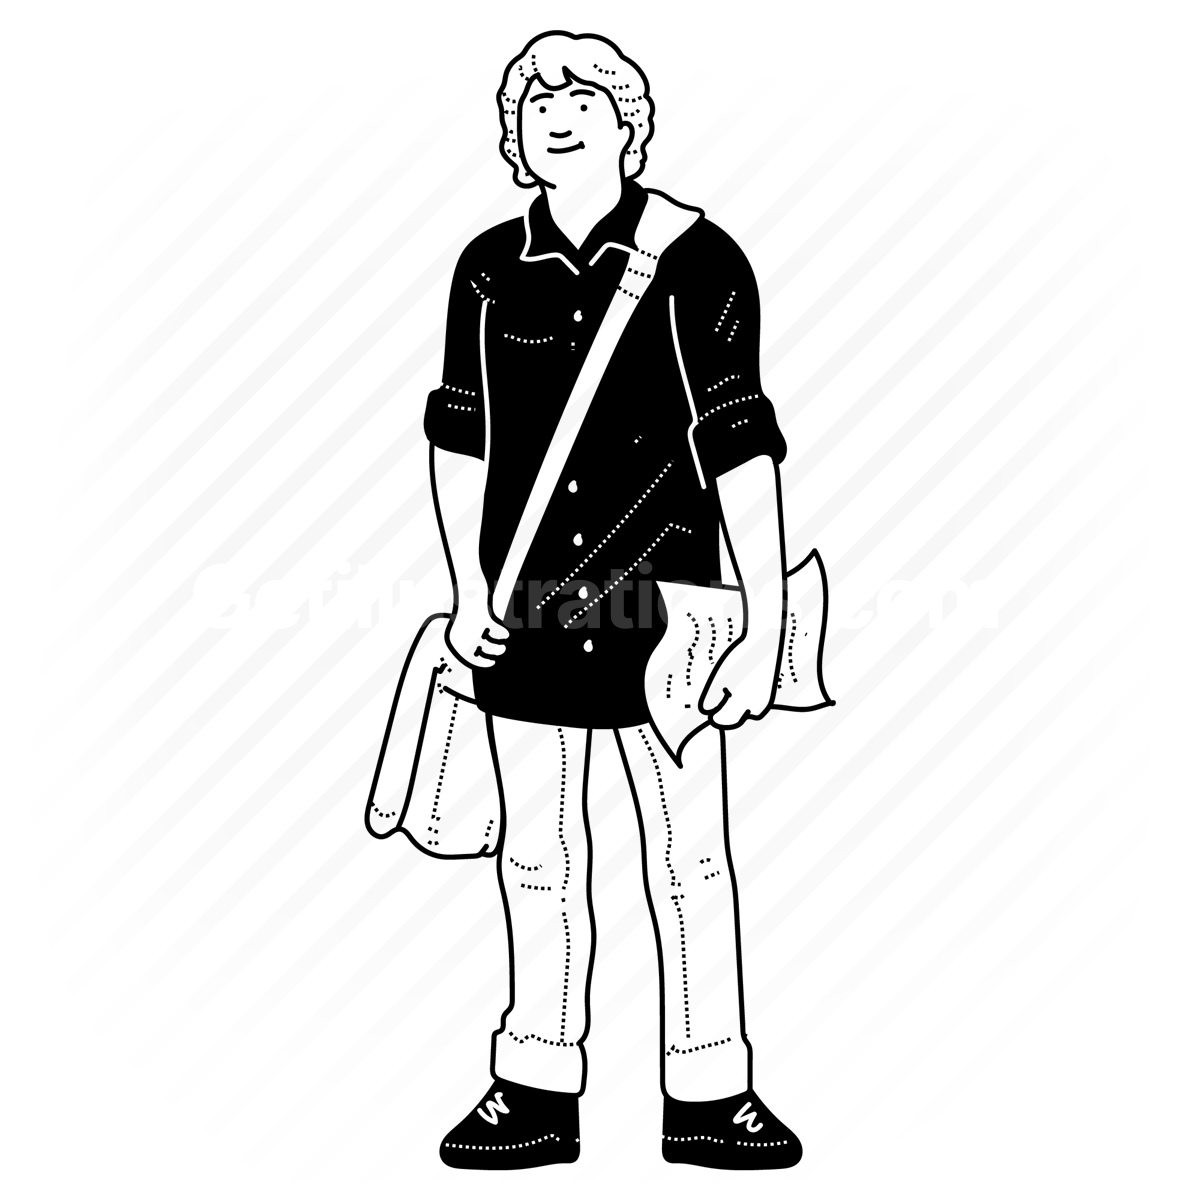 teenager, teenagers, people, person, boy, guy, male, bag, paper, page